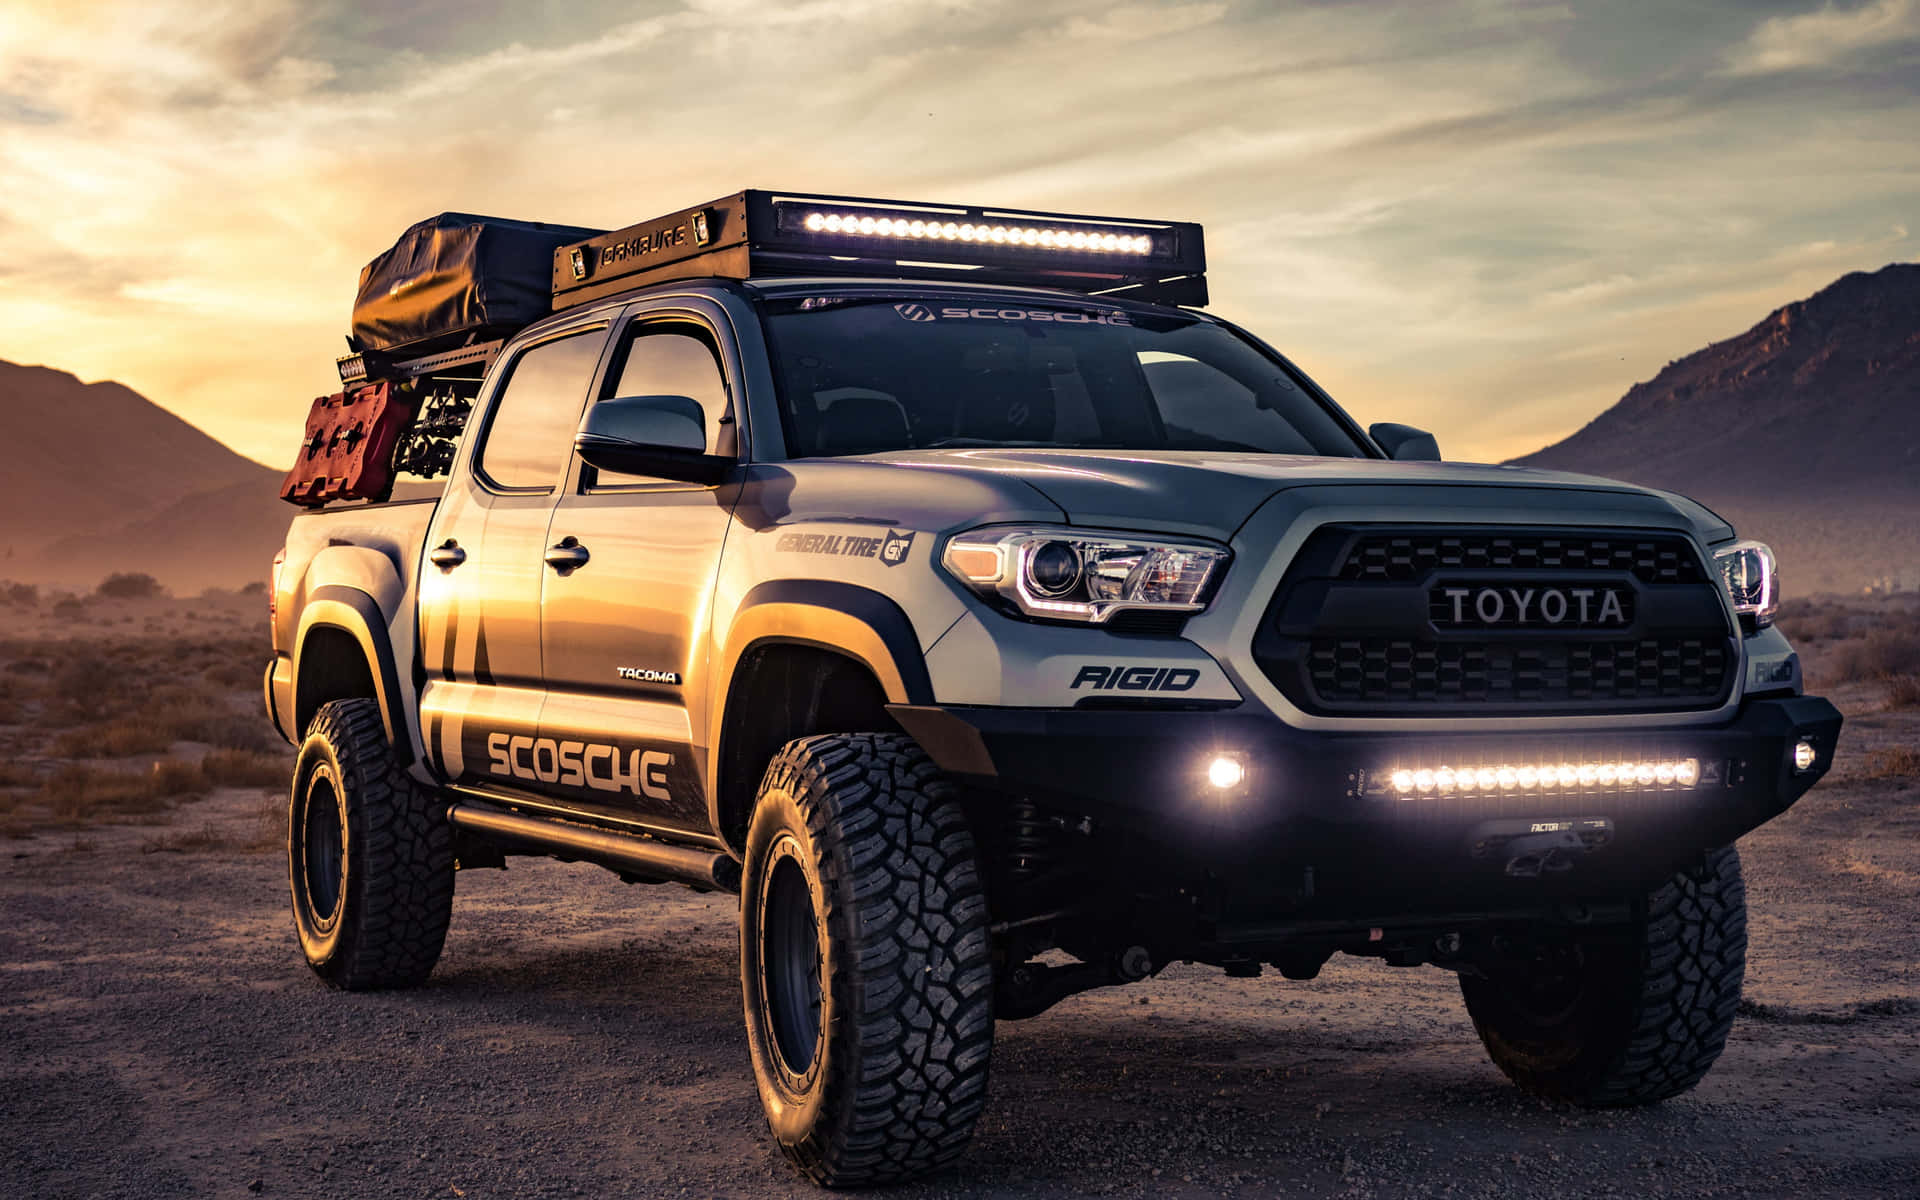 Express Your Sense of Adventure in a Toyota